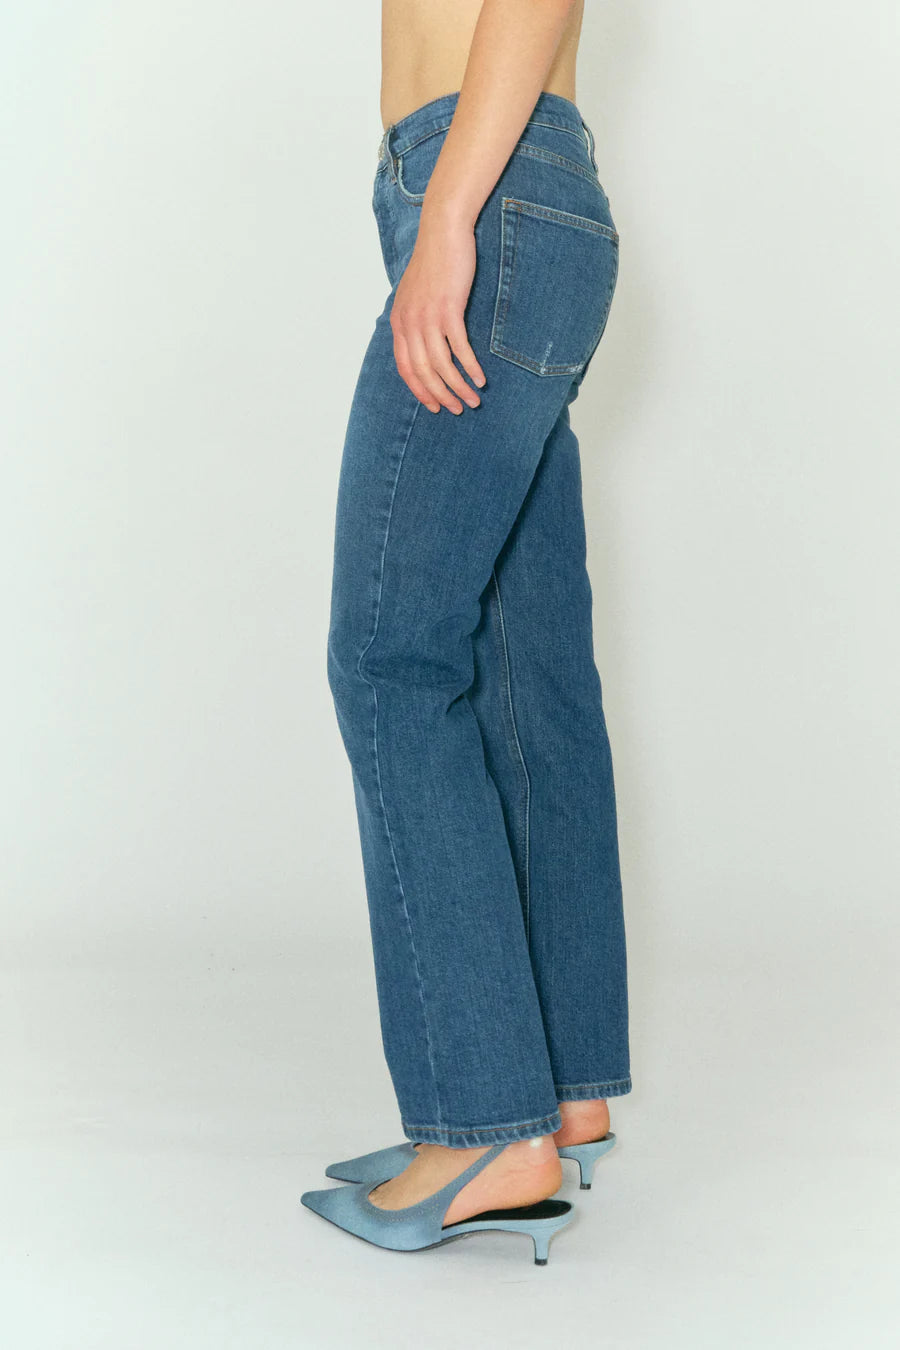 A woman in Marston Jeans - Key West by Tomorrow Denim, standing in front of a white background.